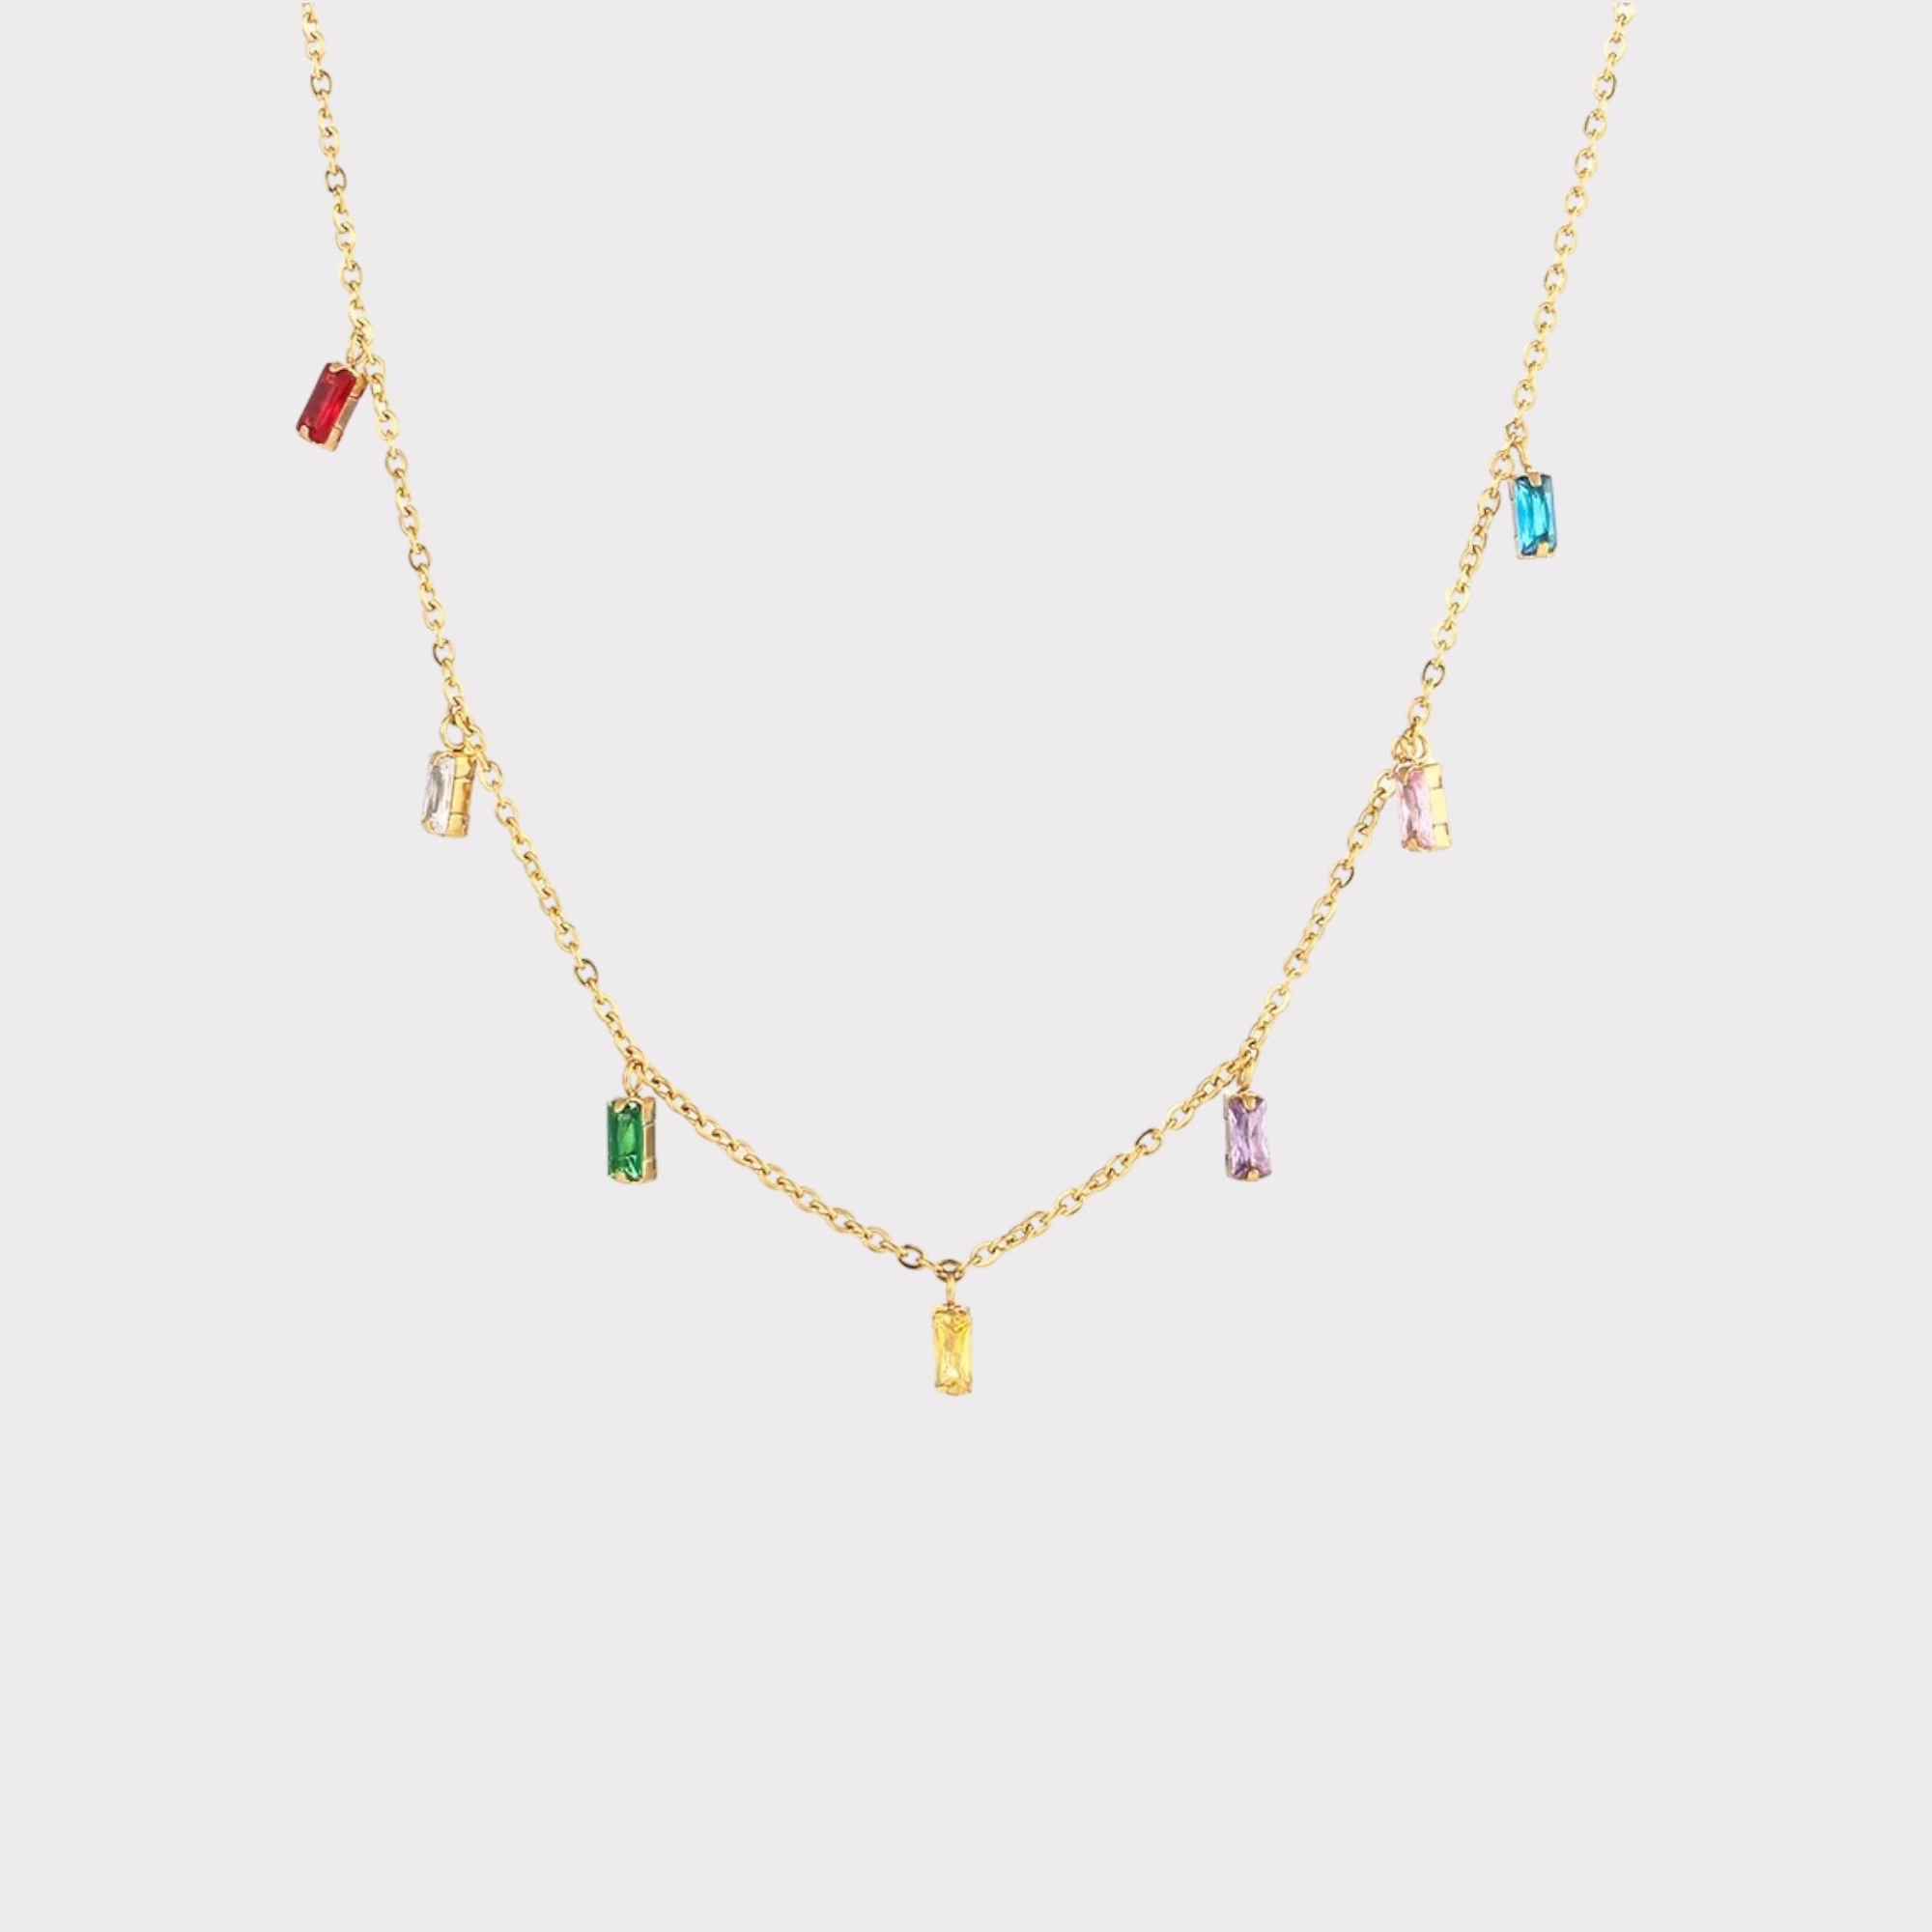 Galactic Glow Gold Chain Necklace with Cubic Zirconia